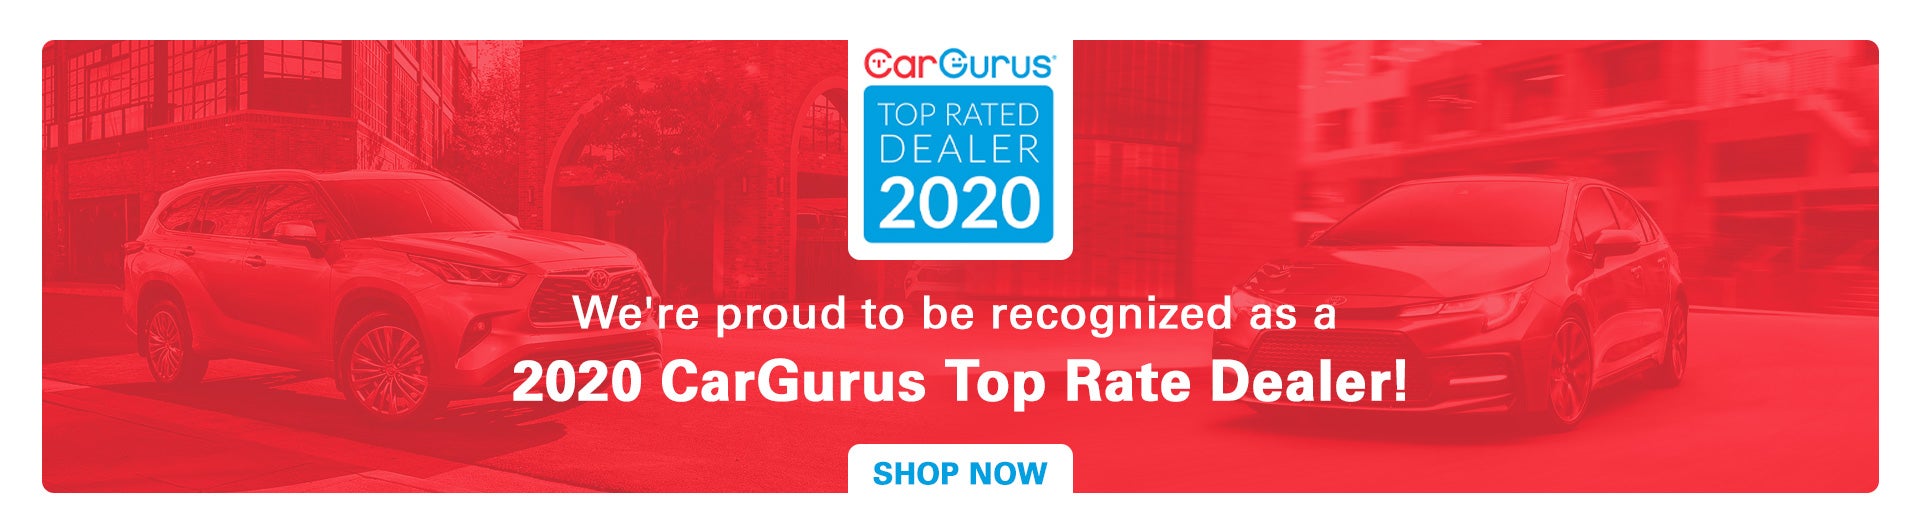 We're proud to be recognized as a 2020 CarGurus Top Rate Dea